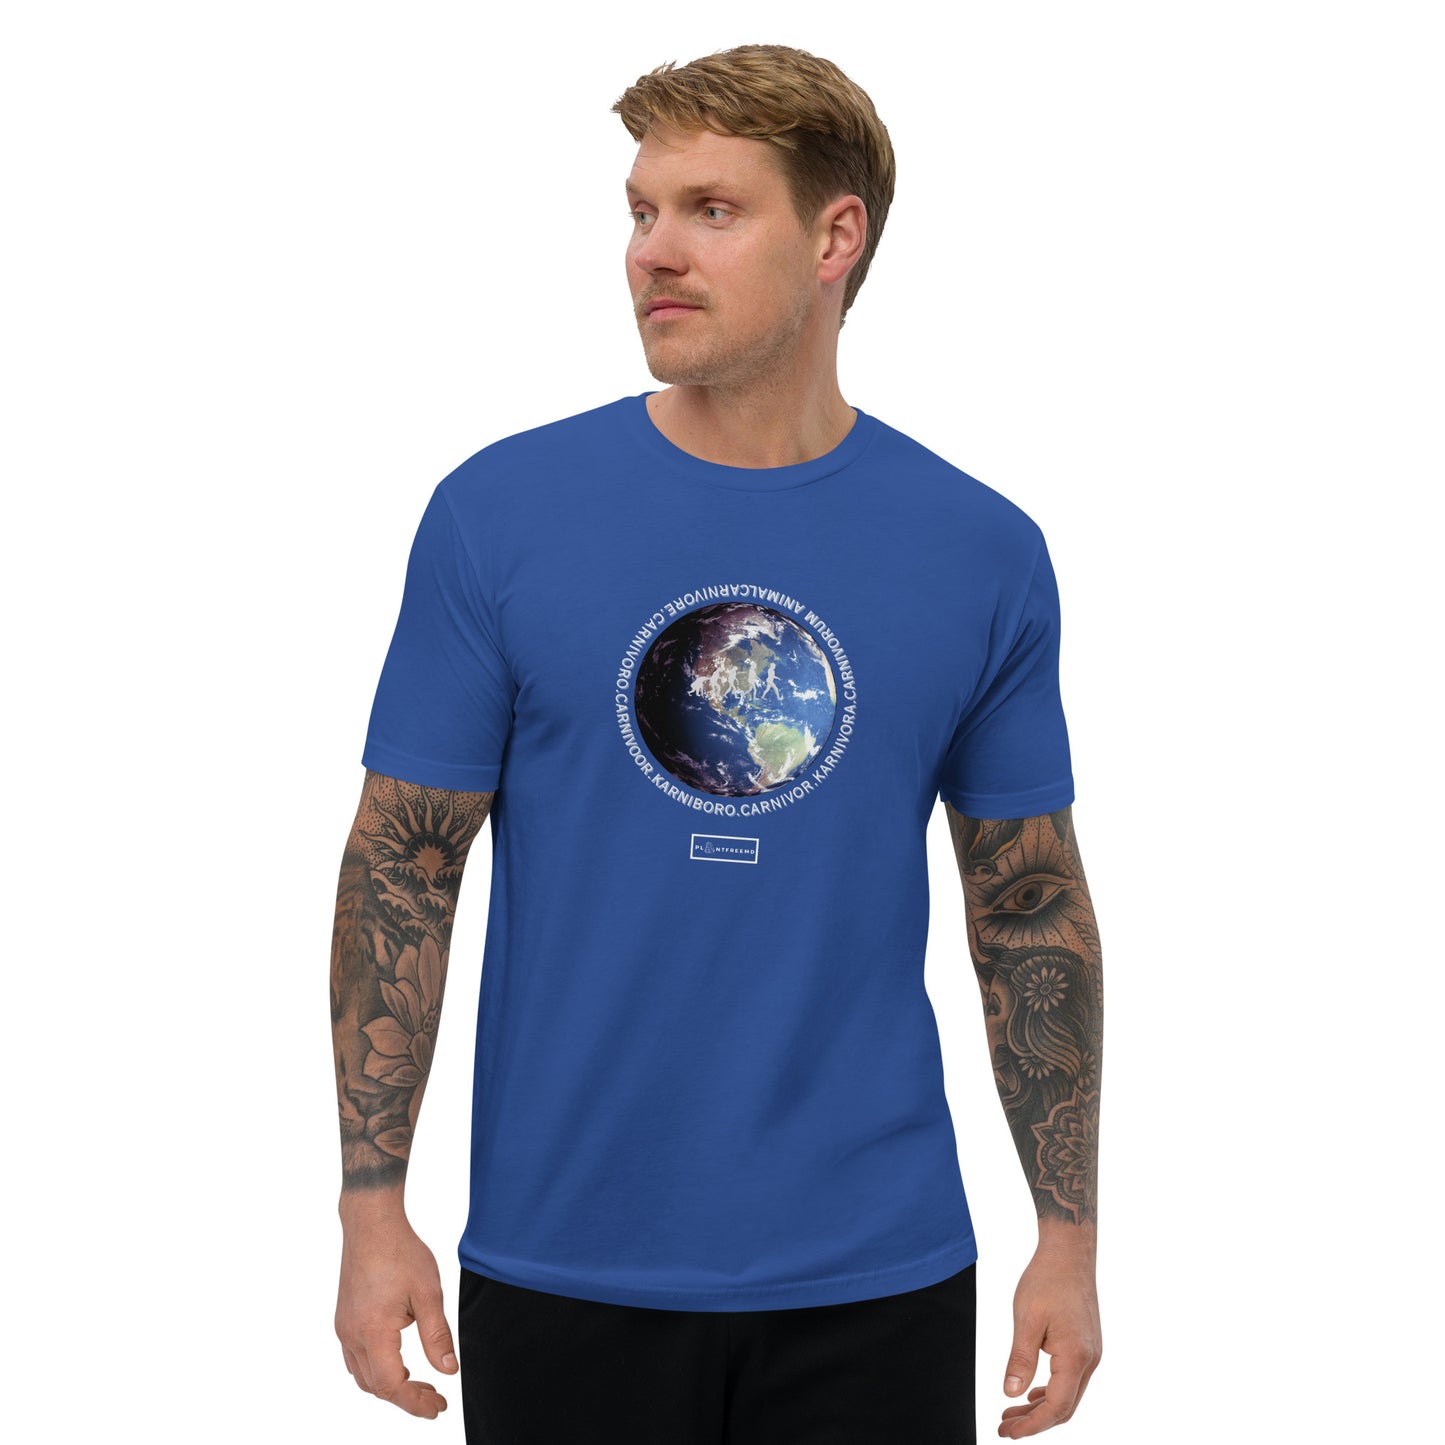 Carnivore Languages Men's Fitted T-shirt